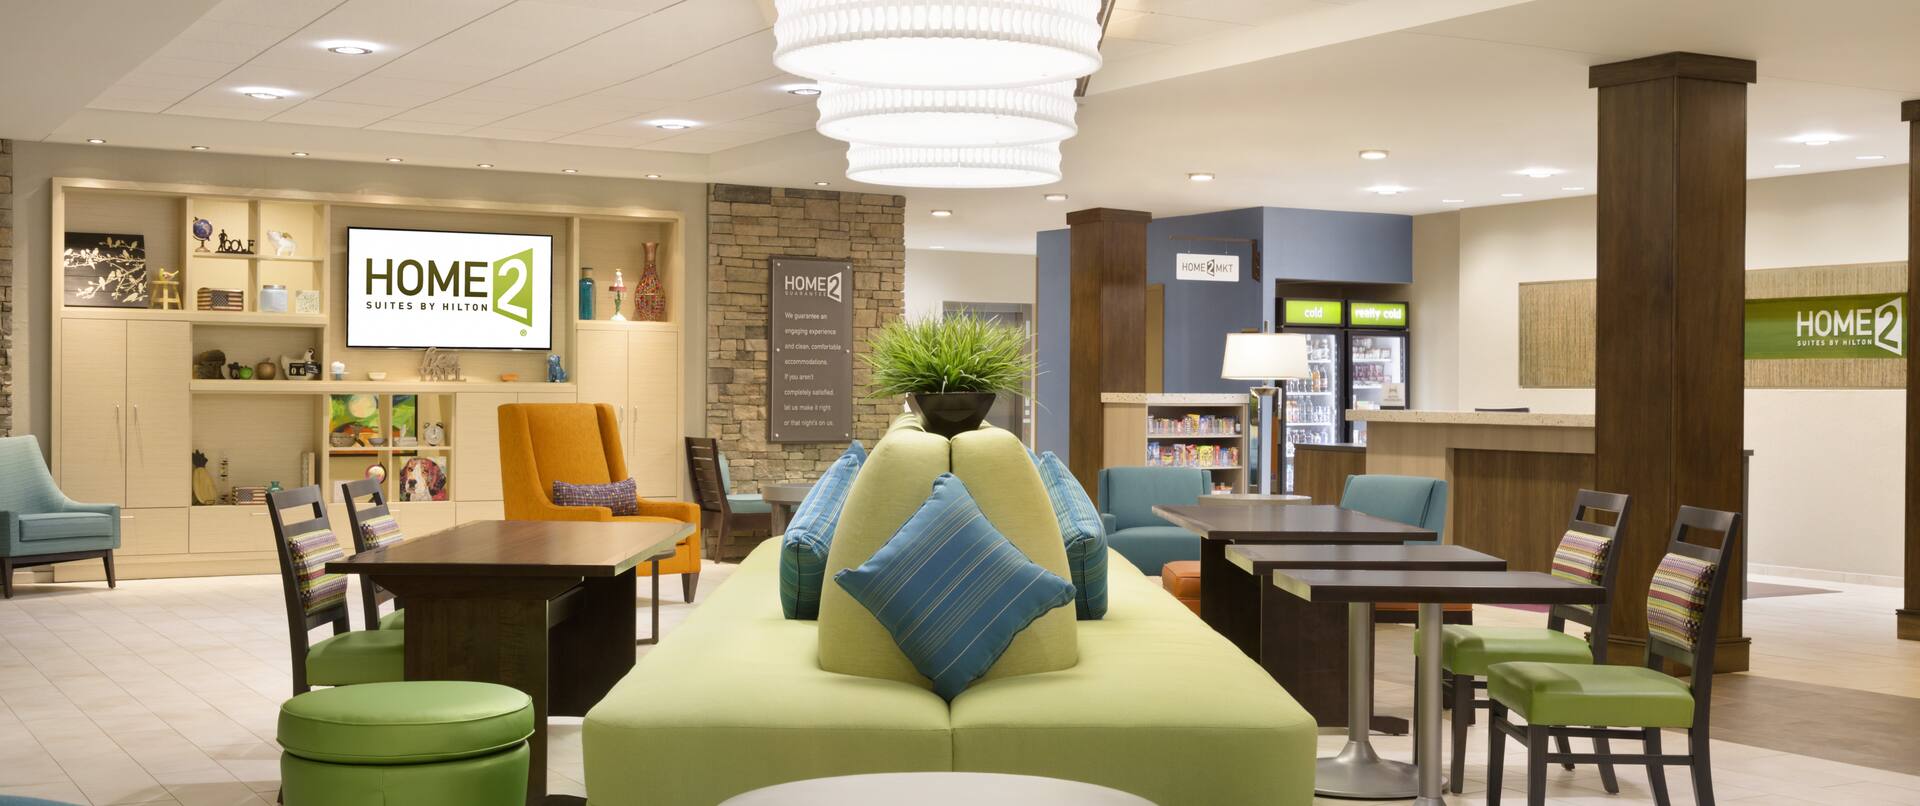 Soft Seating in Lobby